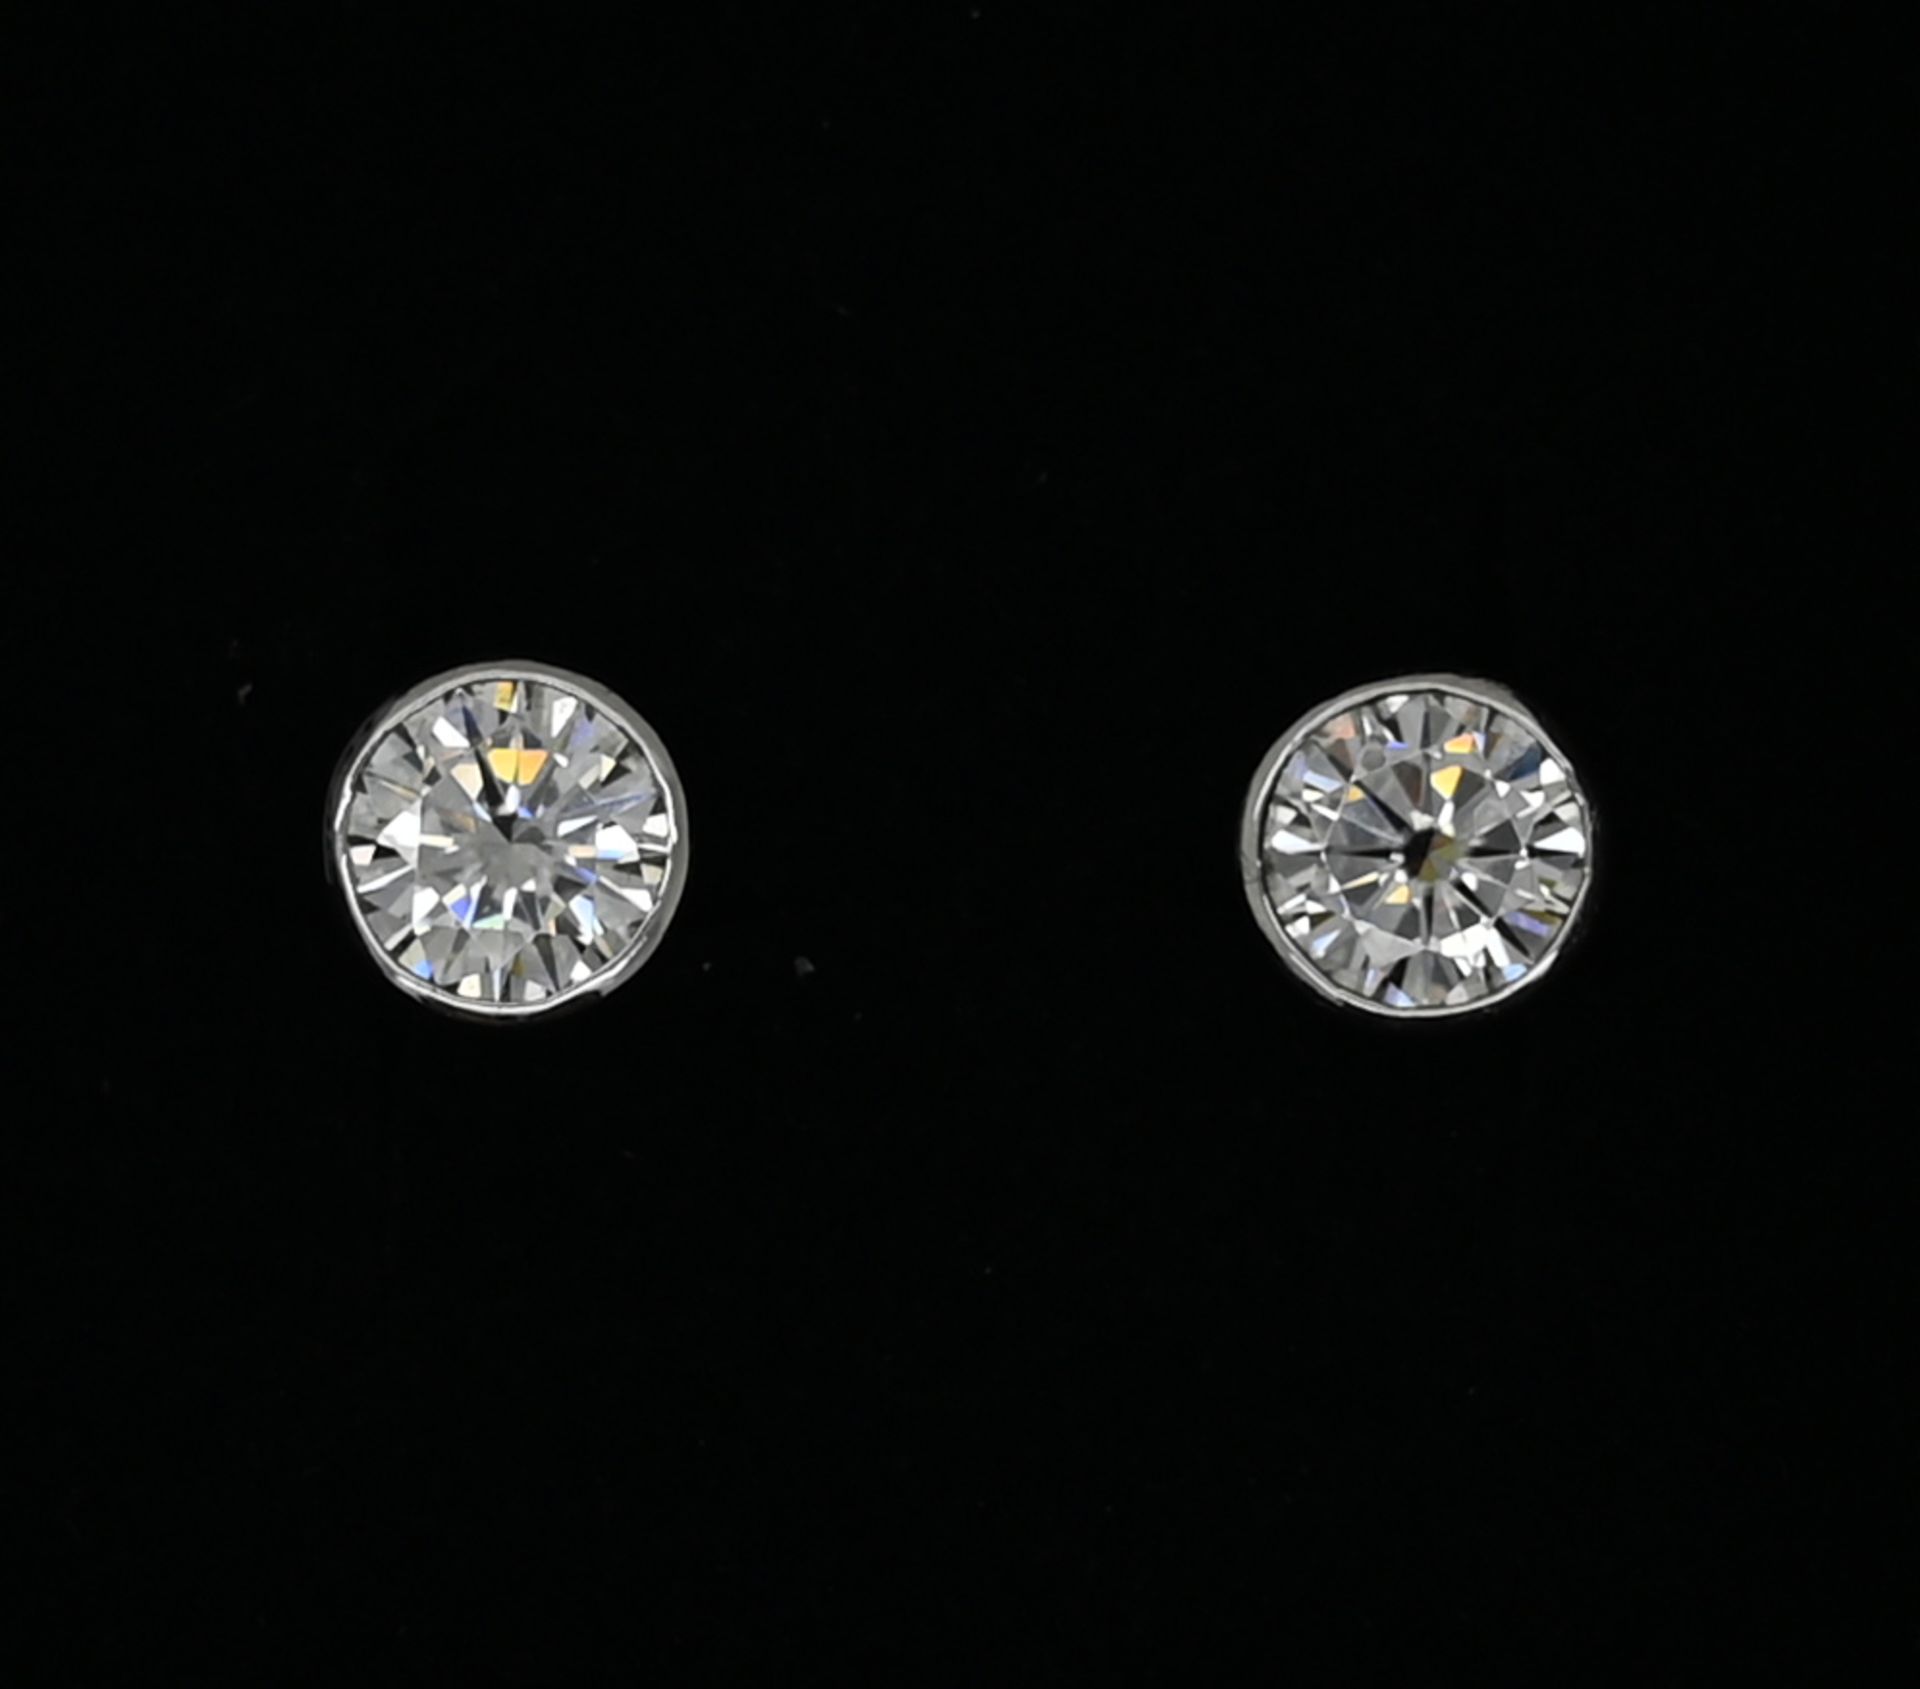 1 Paar Ohrstecker, je wohl Moissanite, je wohl ca. 1,0 ct. (lt. Stempel), je wohl WG 14ct. (gestempe